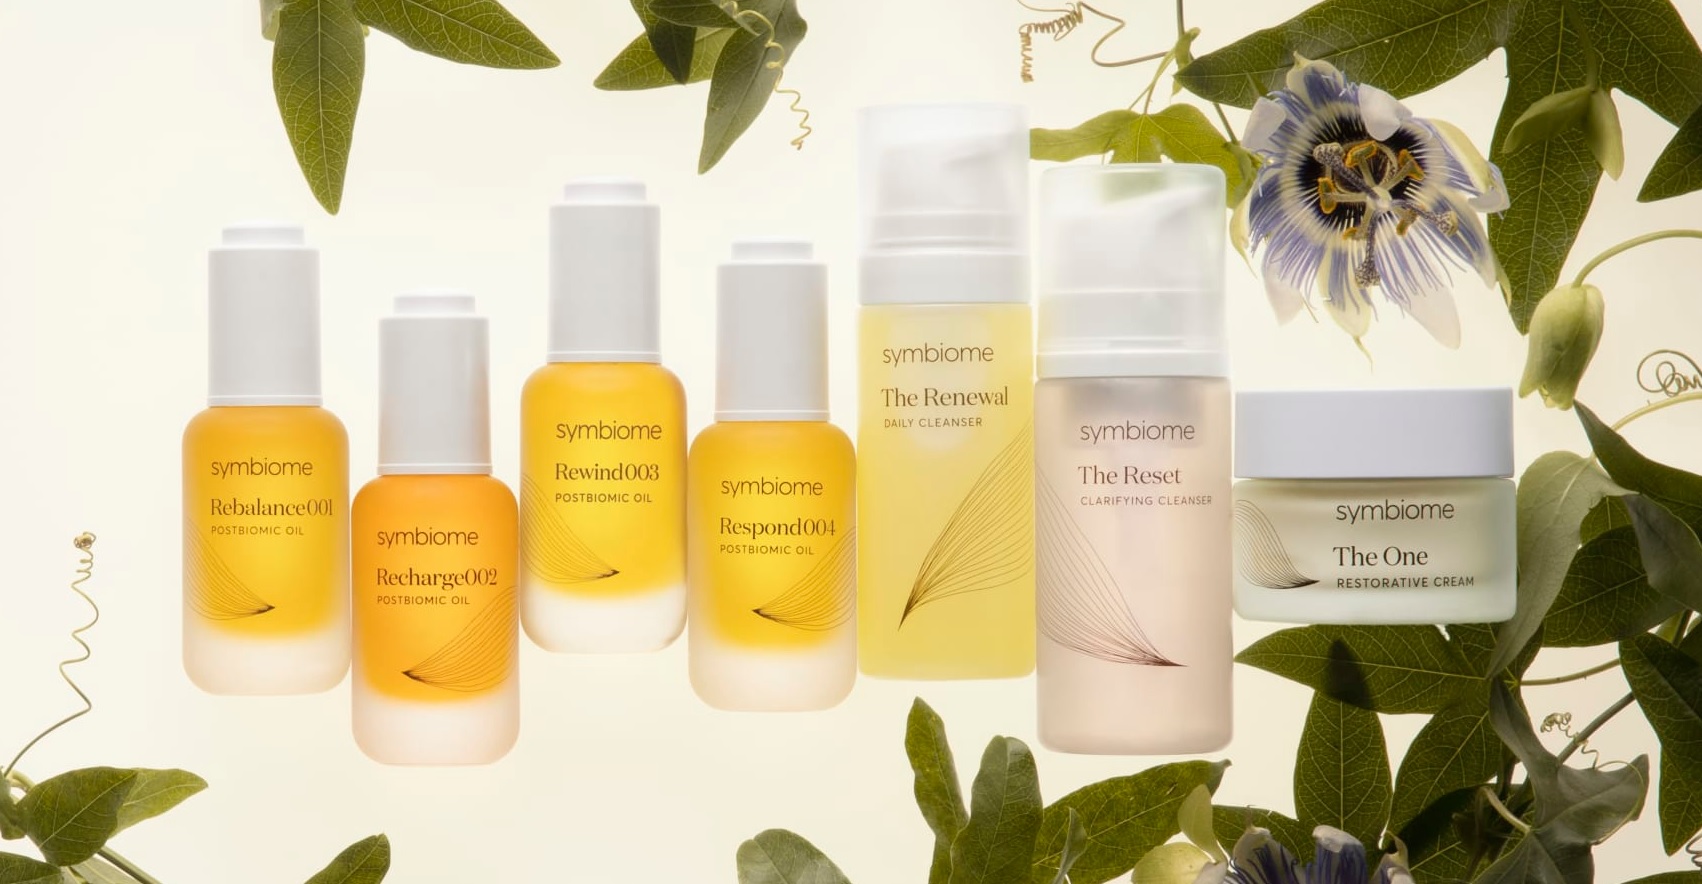 Symbiome Is The Newest Natural Skincare Brand On The Market